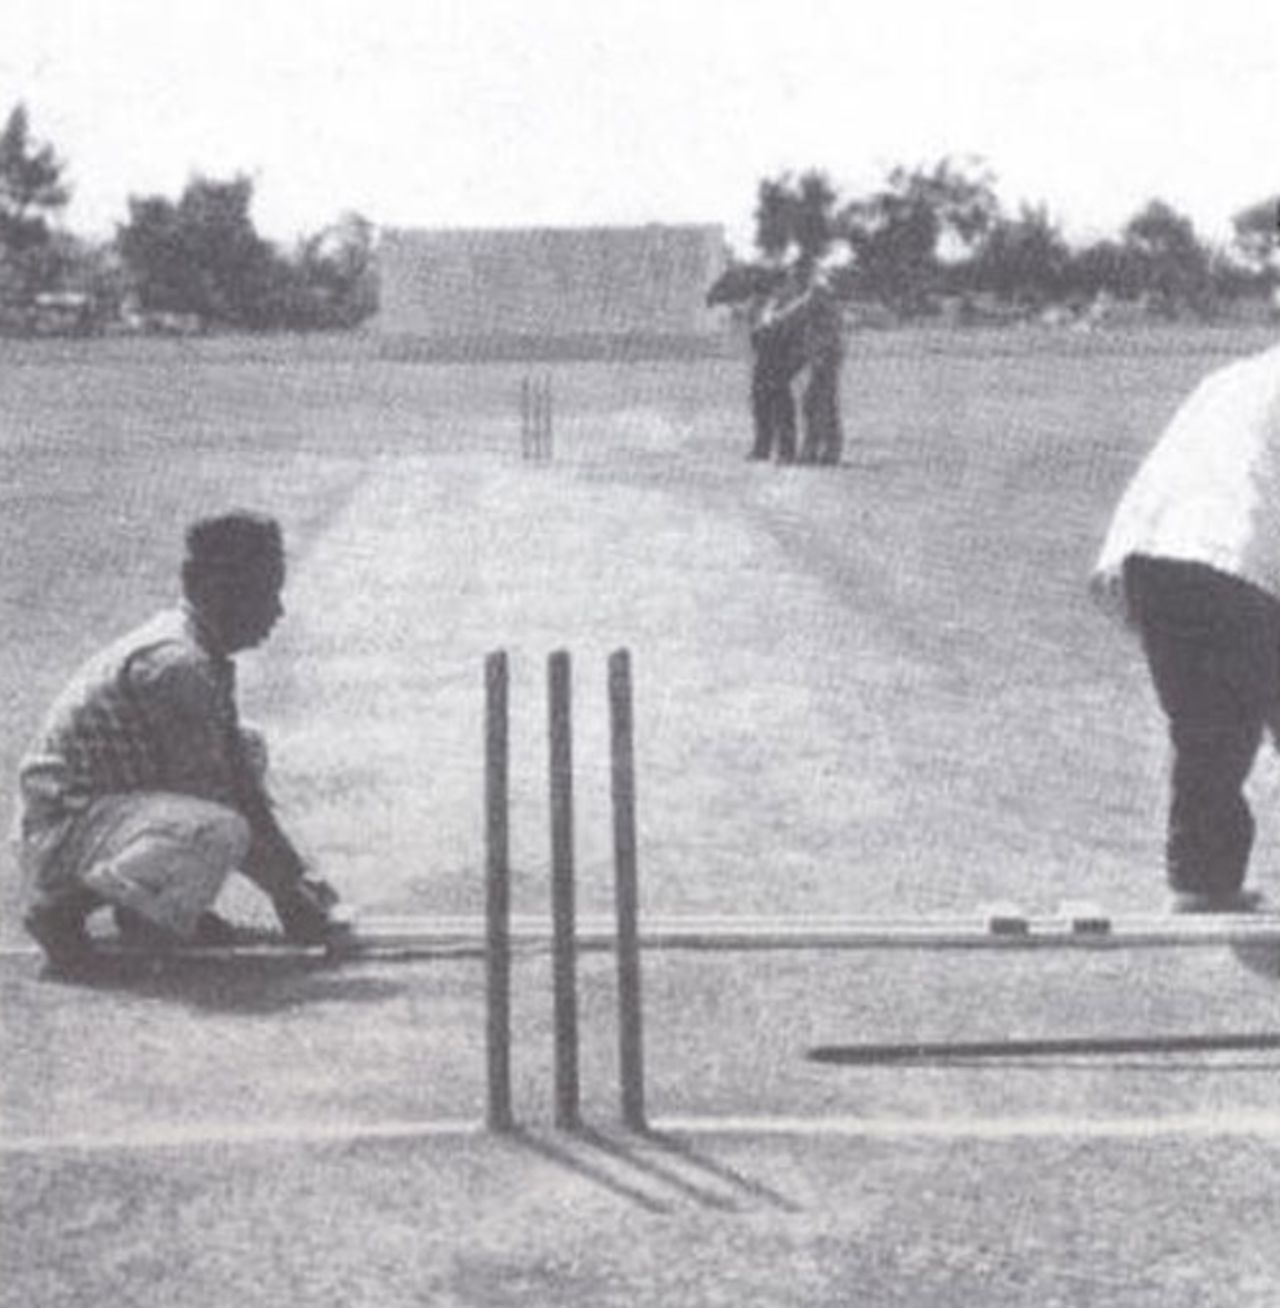 Preparing the pitch at the start of the tenth and final day of the Timeless Test, South Africa v England, 5th Test, Durban, March 14, 1939